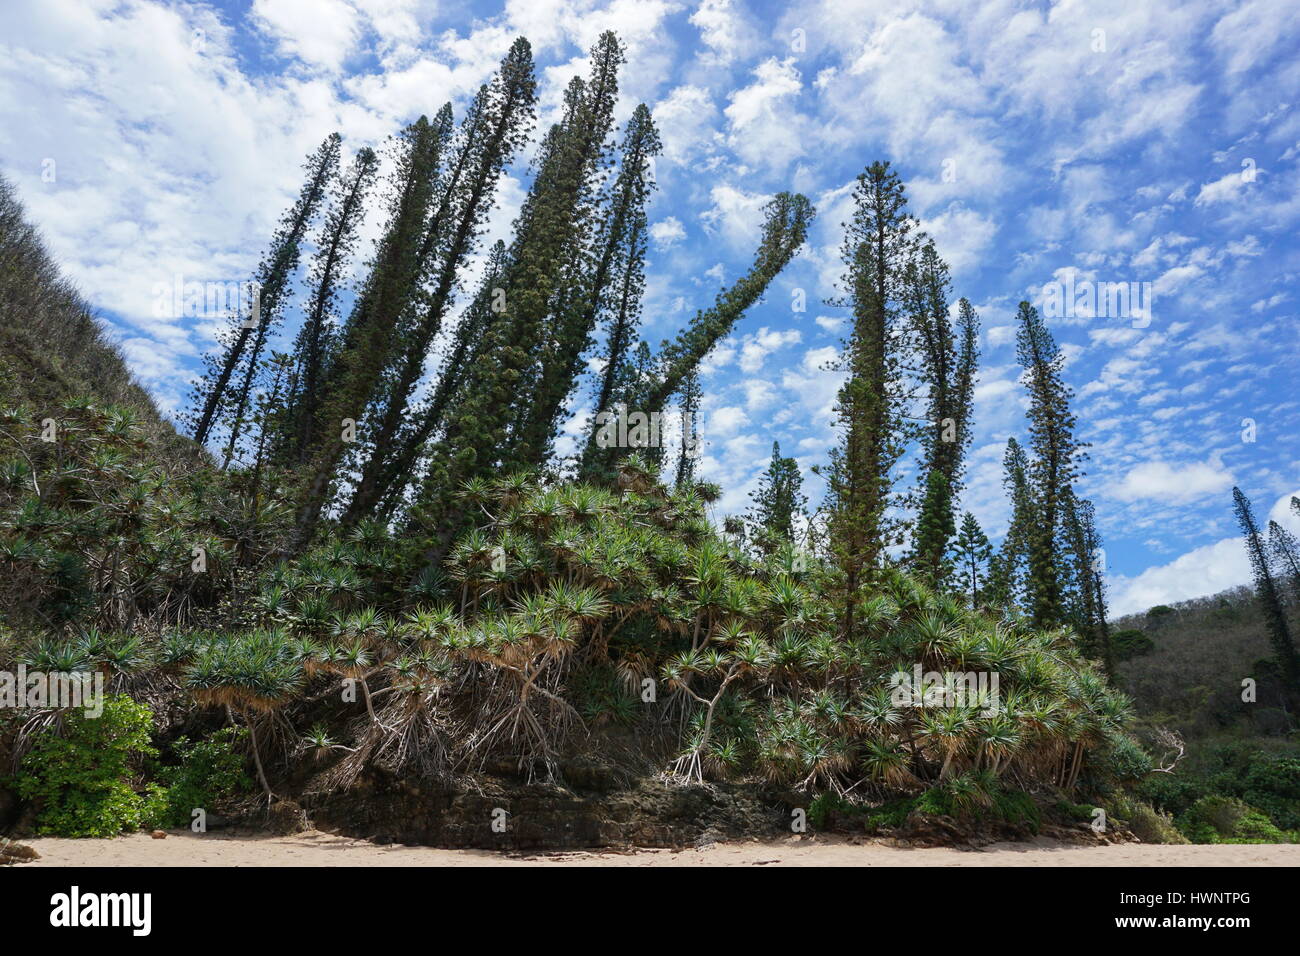 New Caledonia endemic pines with pandanus on the shore, Bourail, Grande Terre island, south Pacific Stock Photo